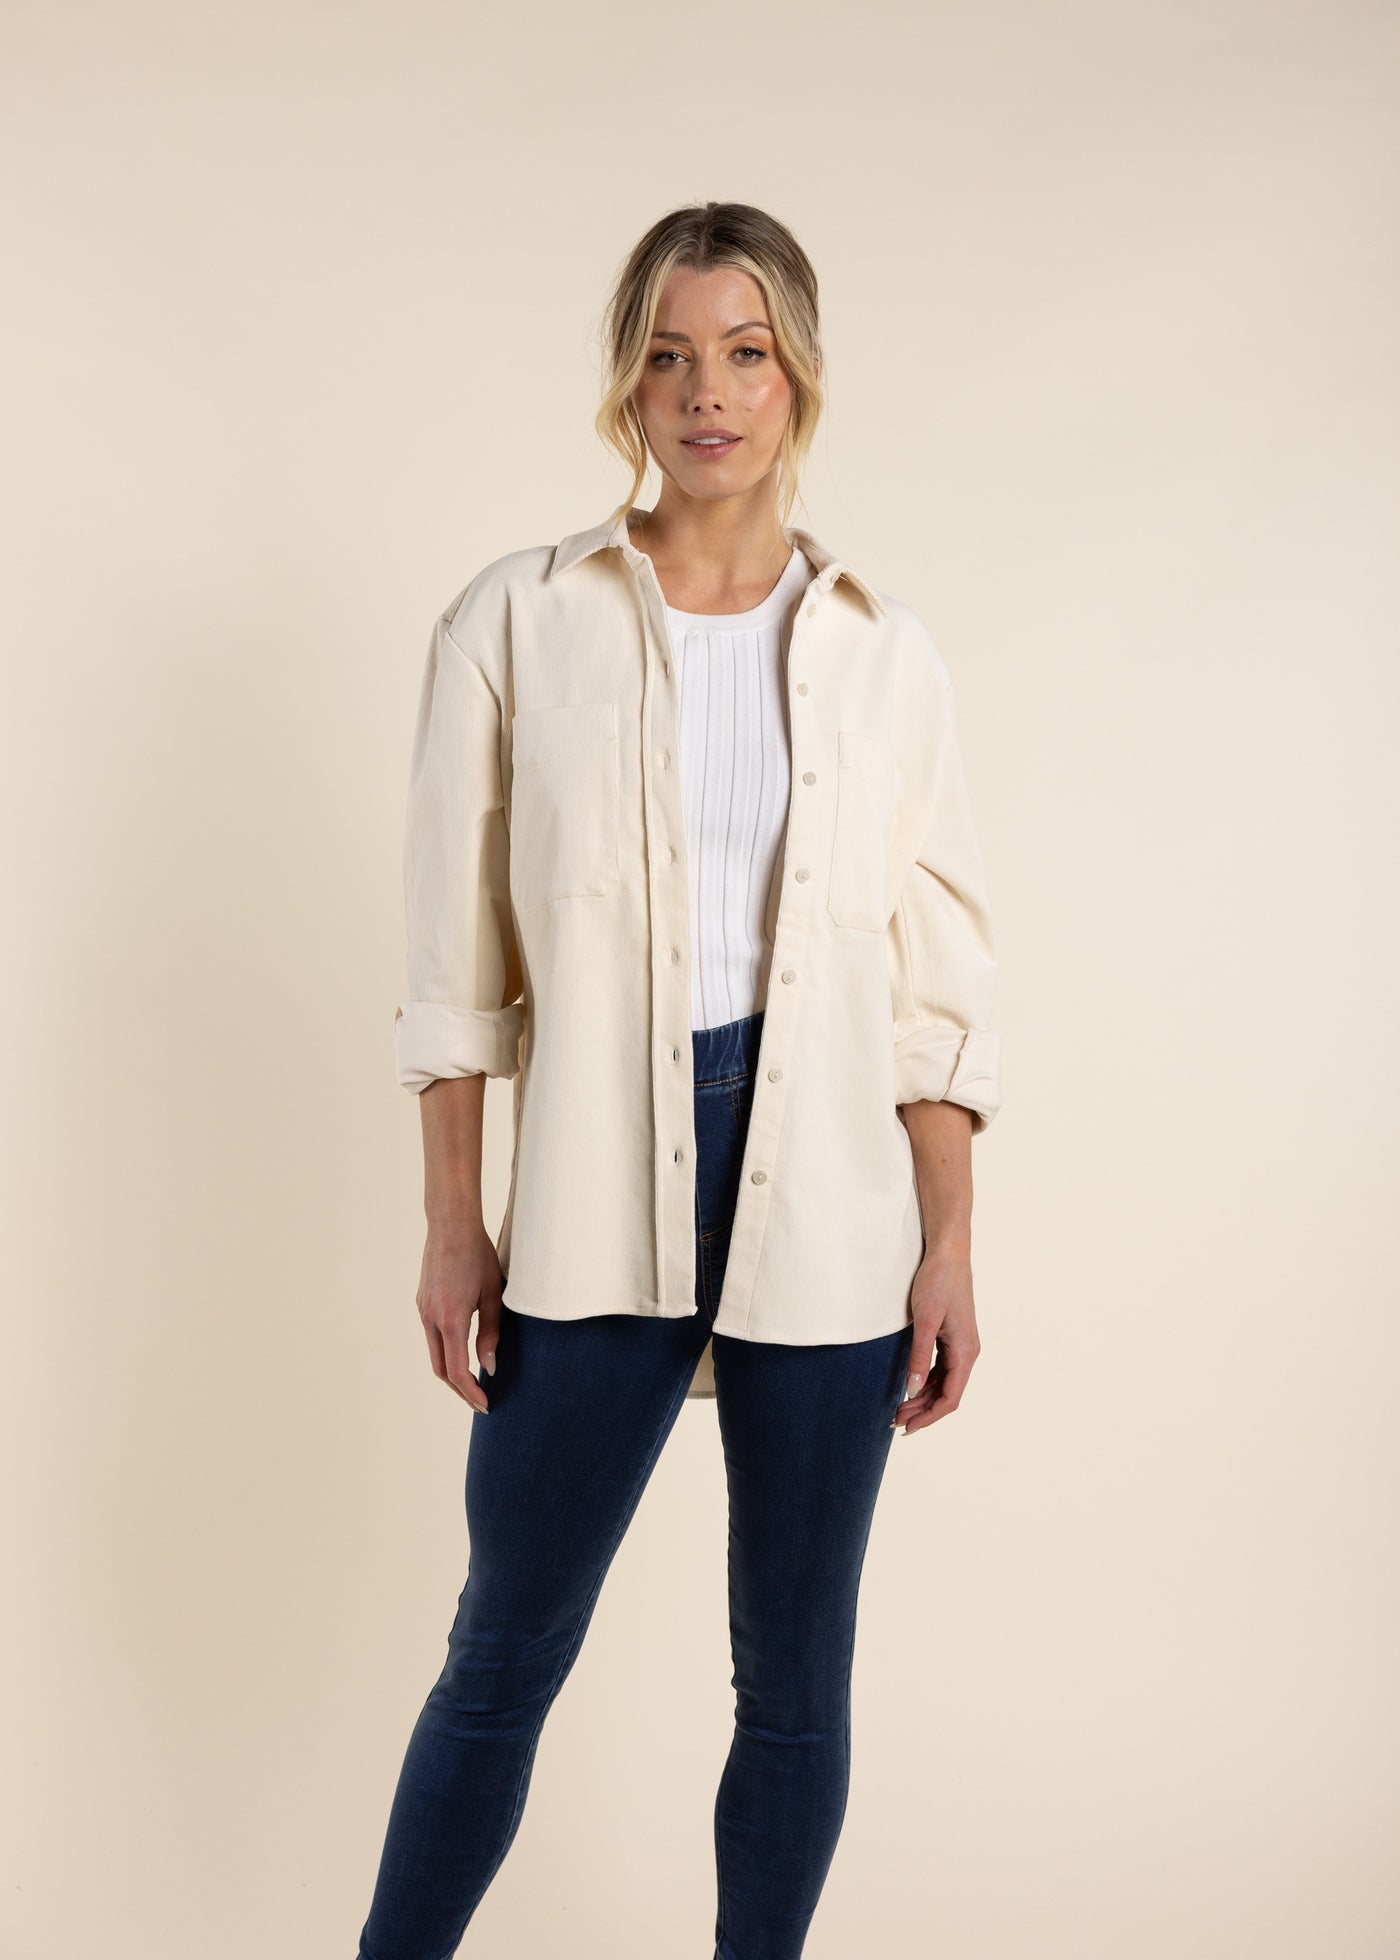 TWO-T's</p>Baby Cord Shirt Jacket</p>(Ivory)